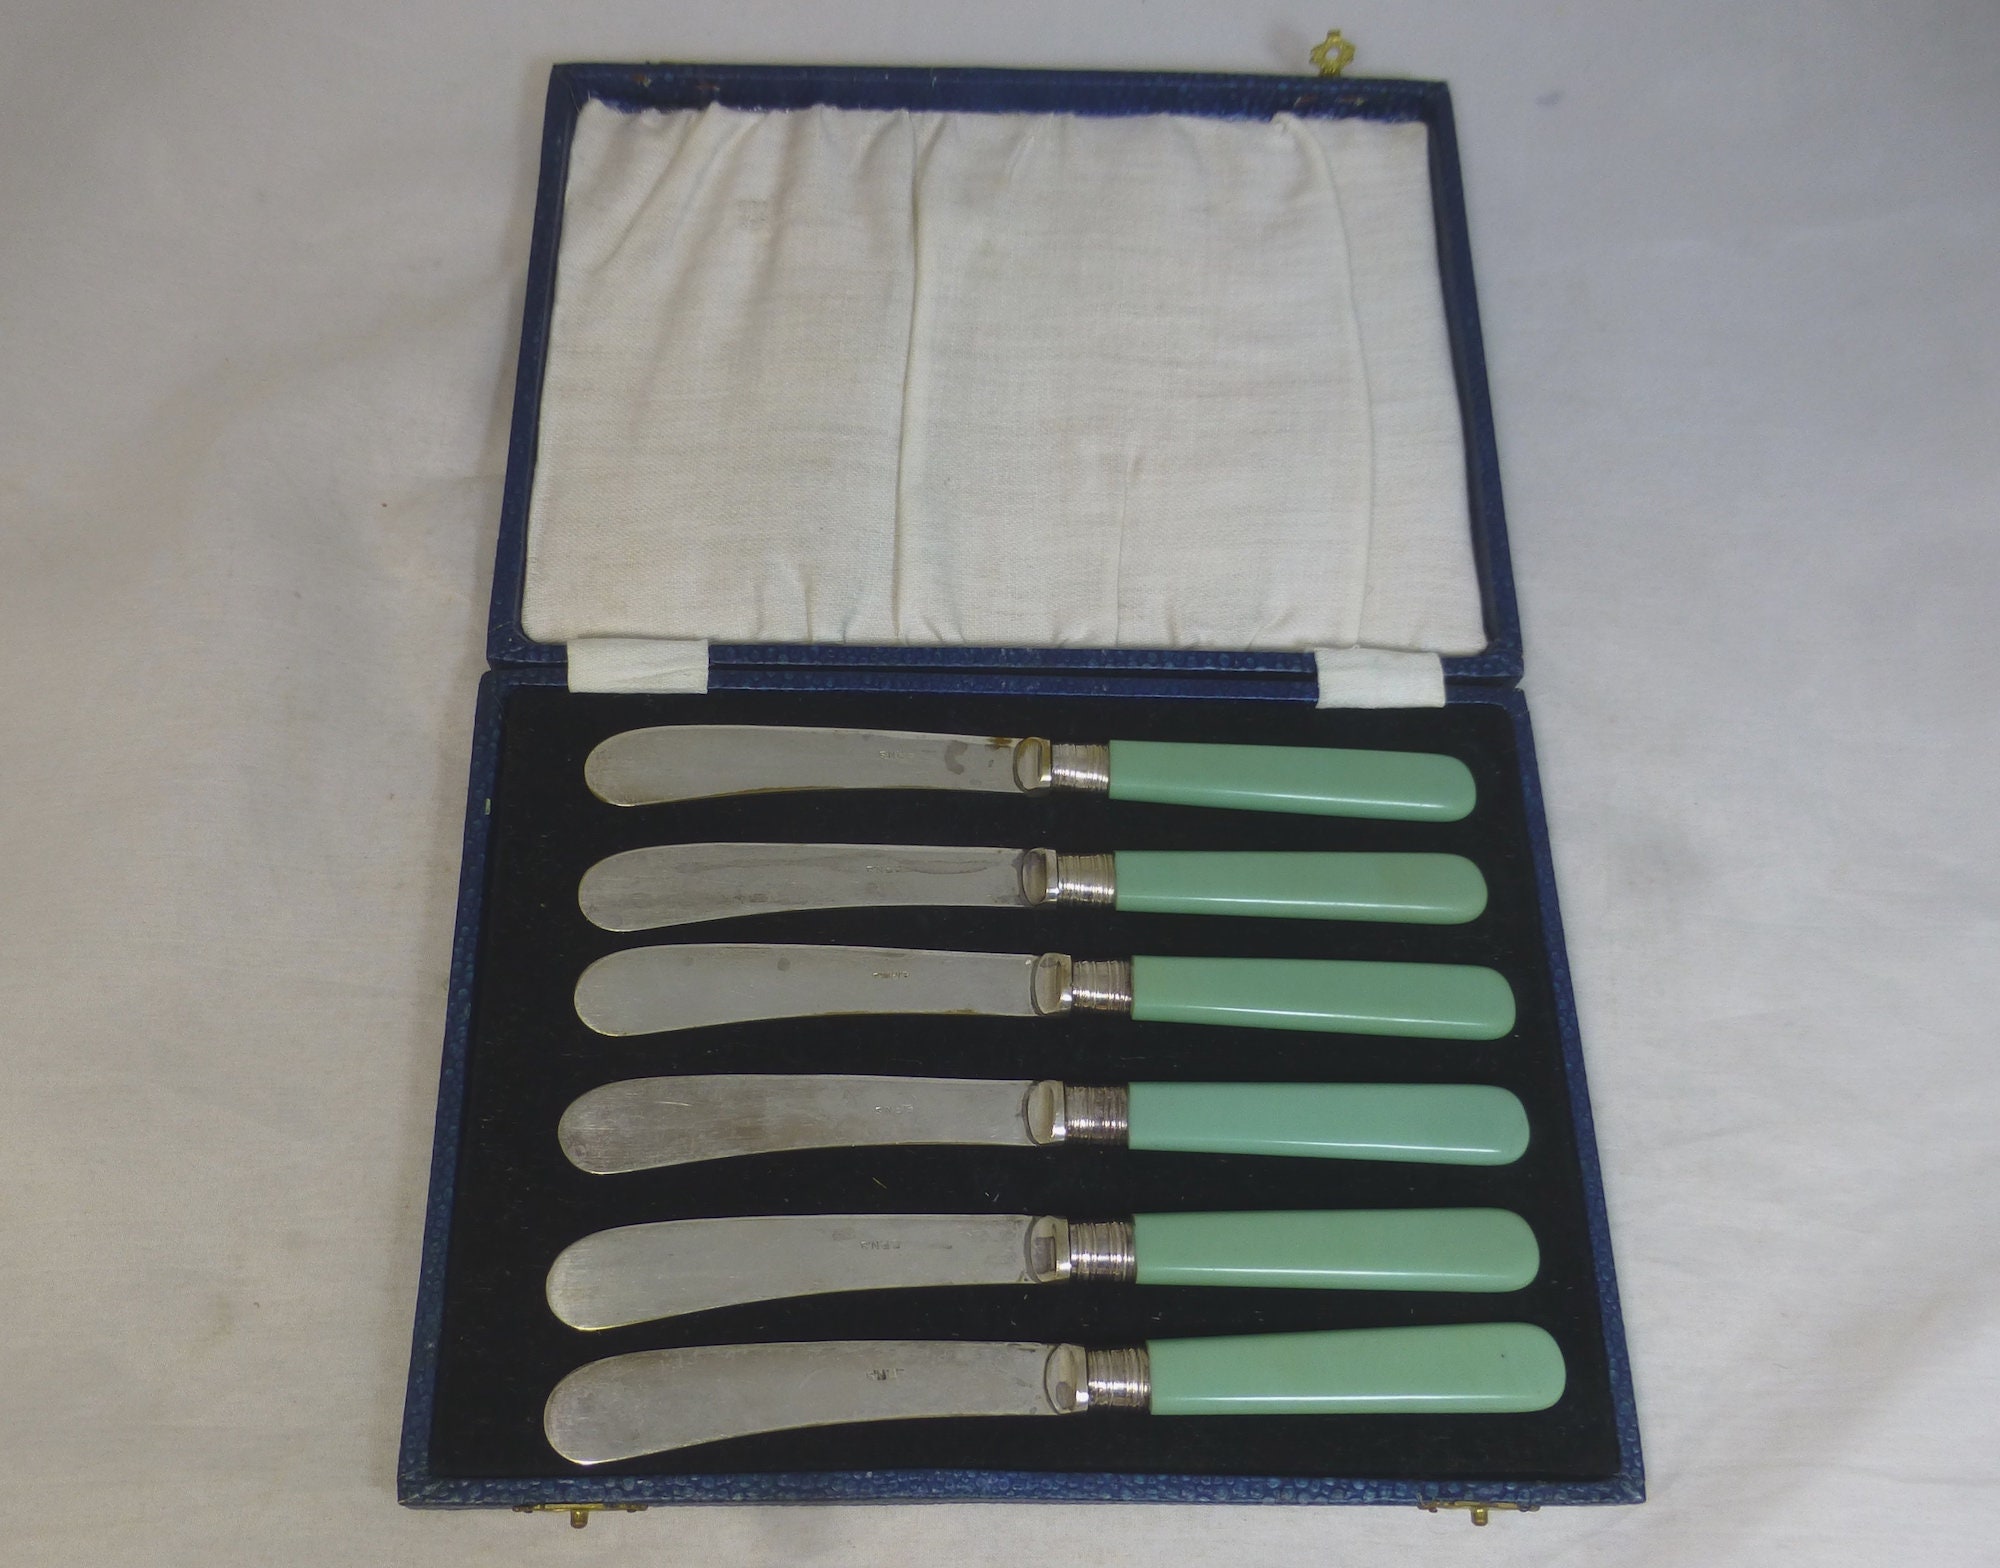 Vintage Set of BUTTER KNIVES With Yellow Handles From Switzerland